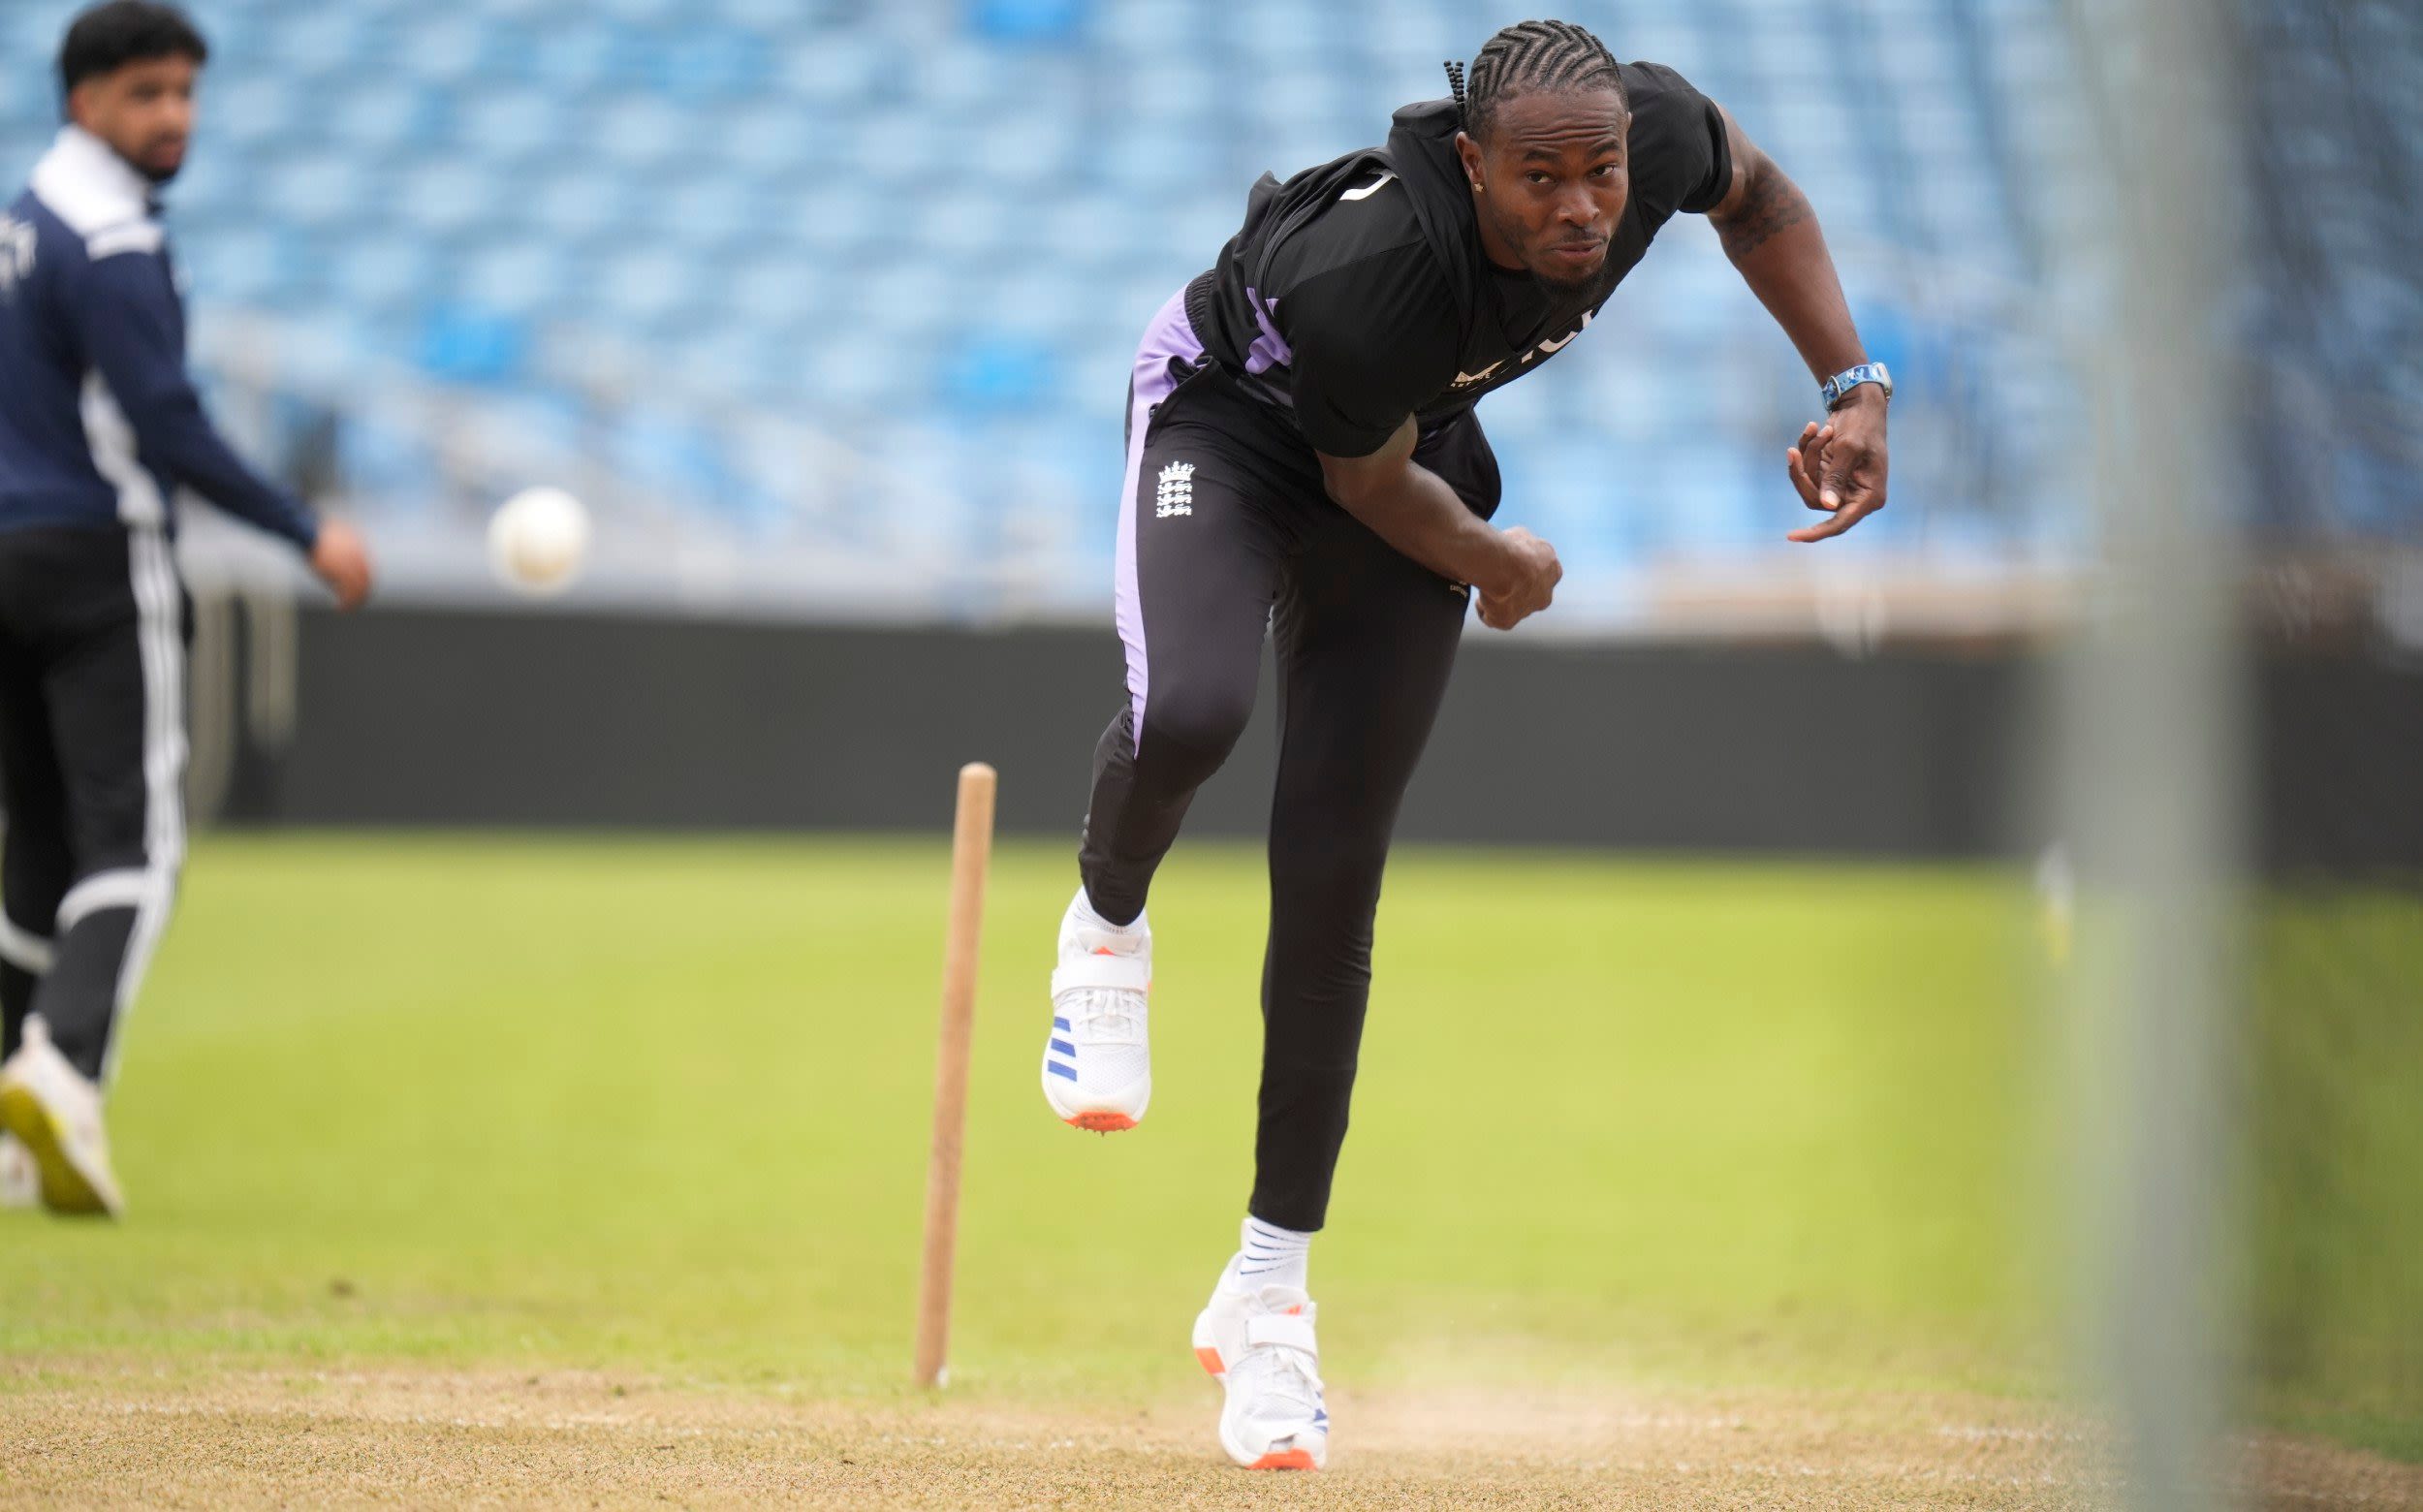 Jofra Archer in England home return after four years as T20 World Cup prep gathers pace